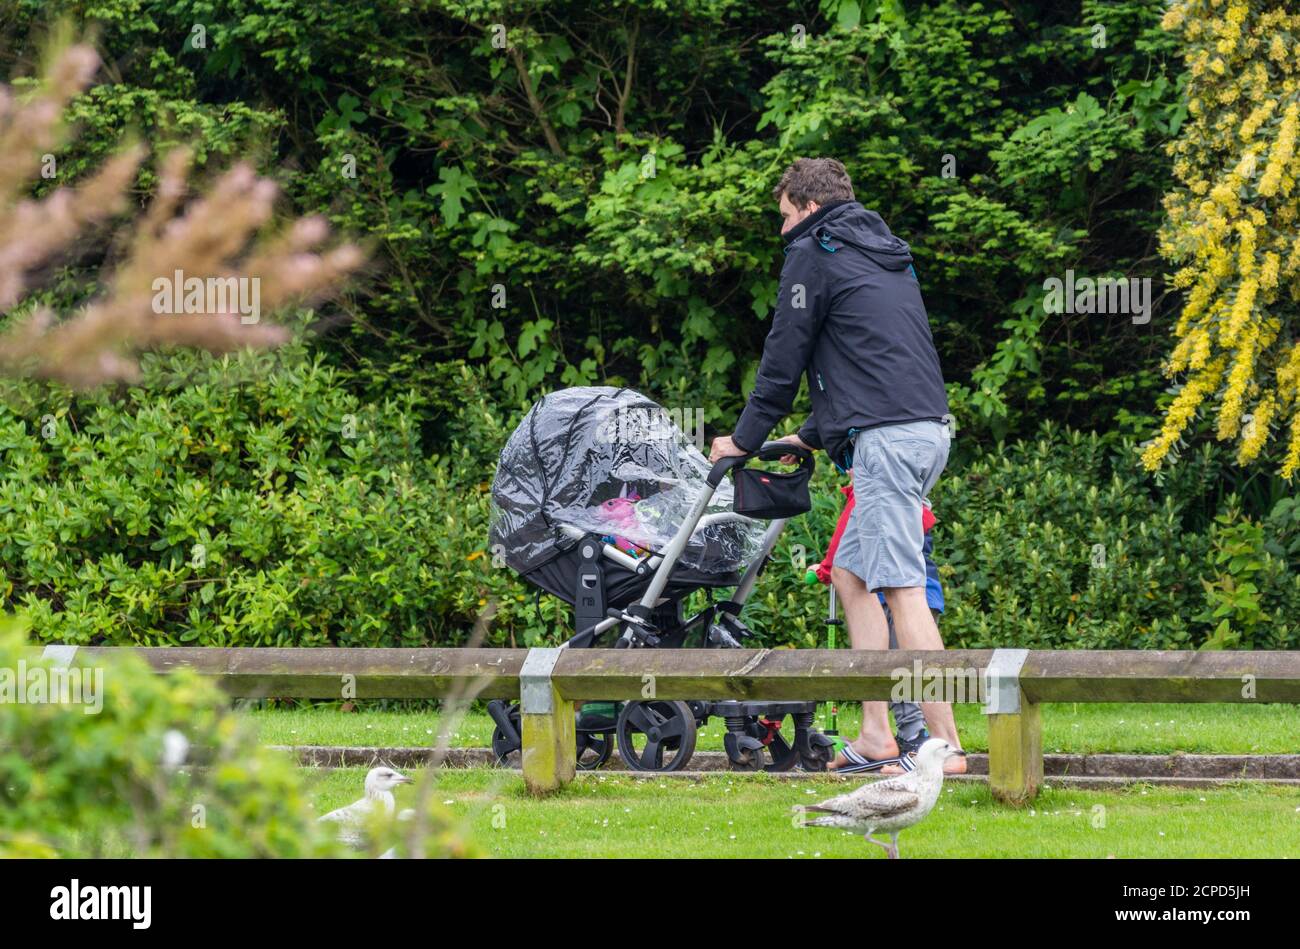 Man with children pushing baby in pushchair around a park. Concept of single father or single male parent (man may or may not be single or a parent). Stock Photo